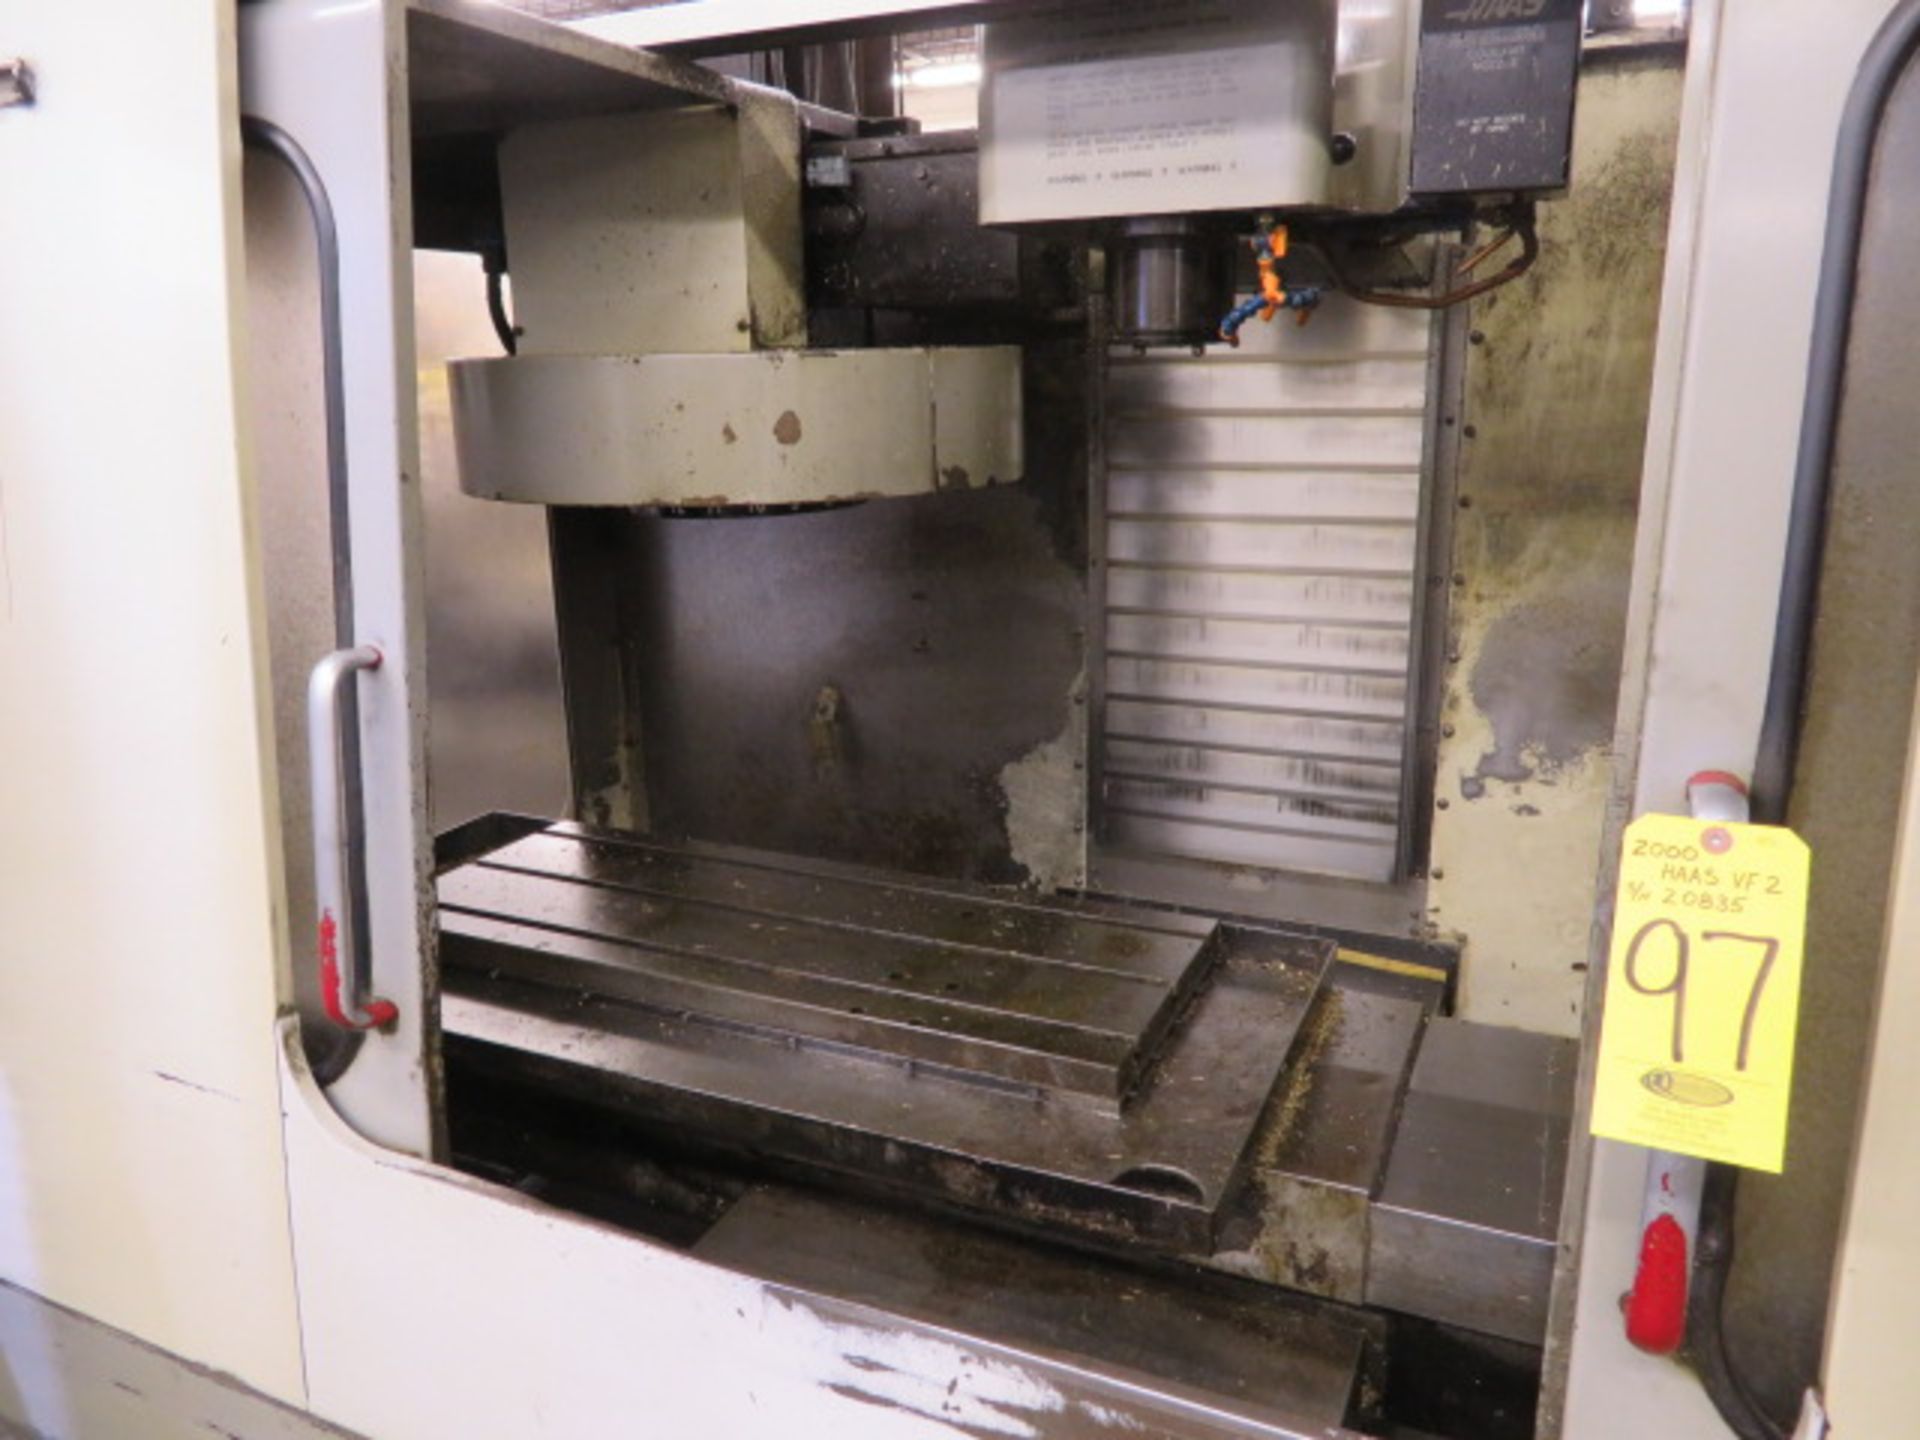 2000 HAAS VF-2 CNC Vertical Machining Center, S/N 20835, HAAS CNC Control, 4TH AXIS ENABLED - Image 2 of 6